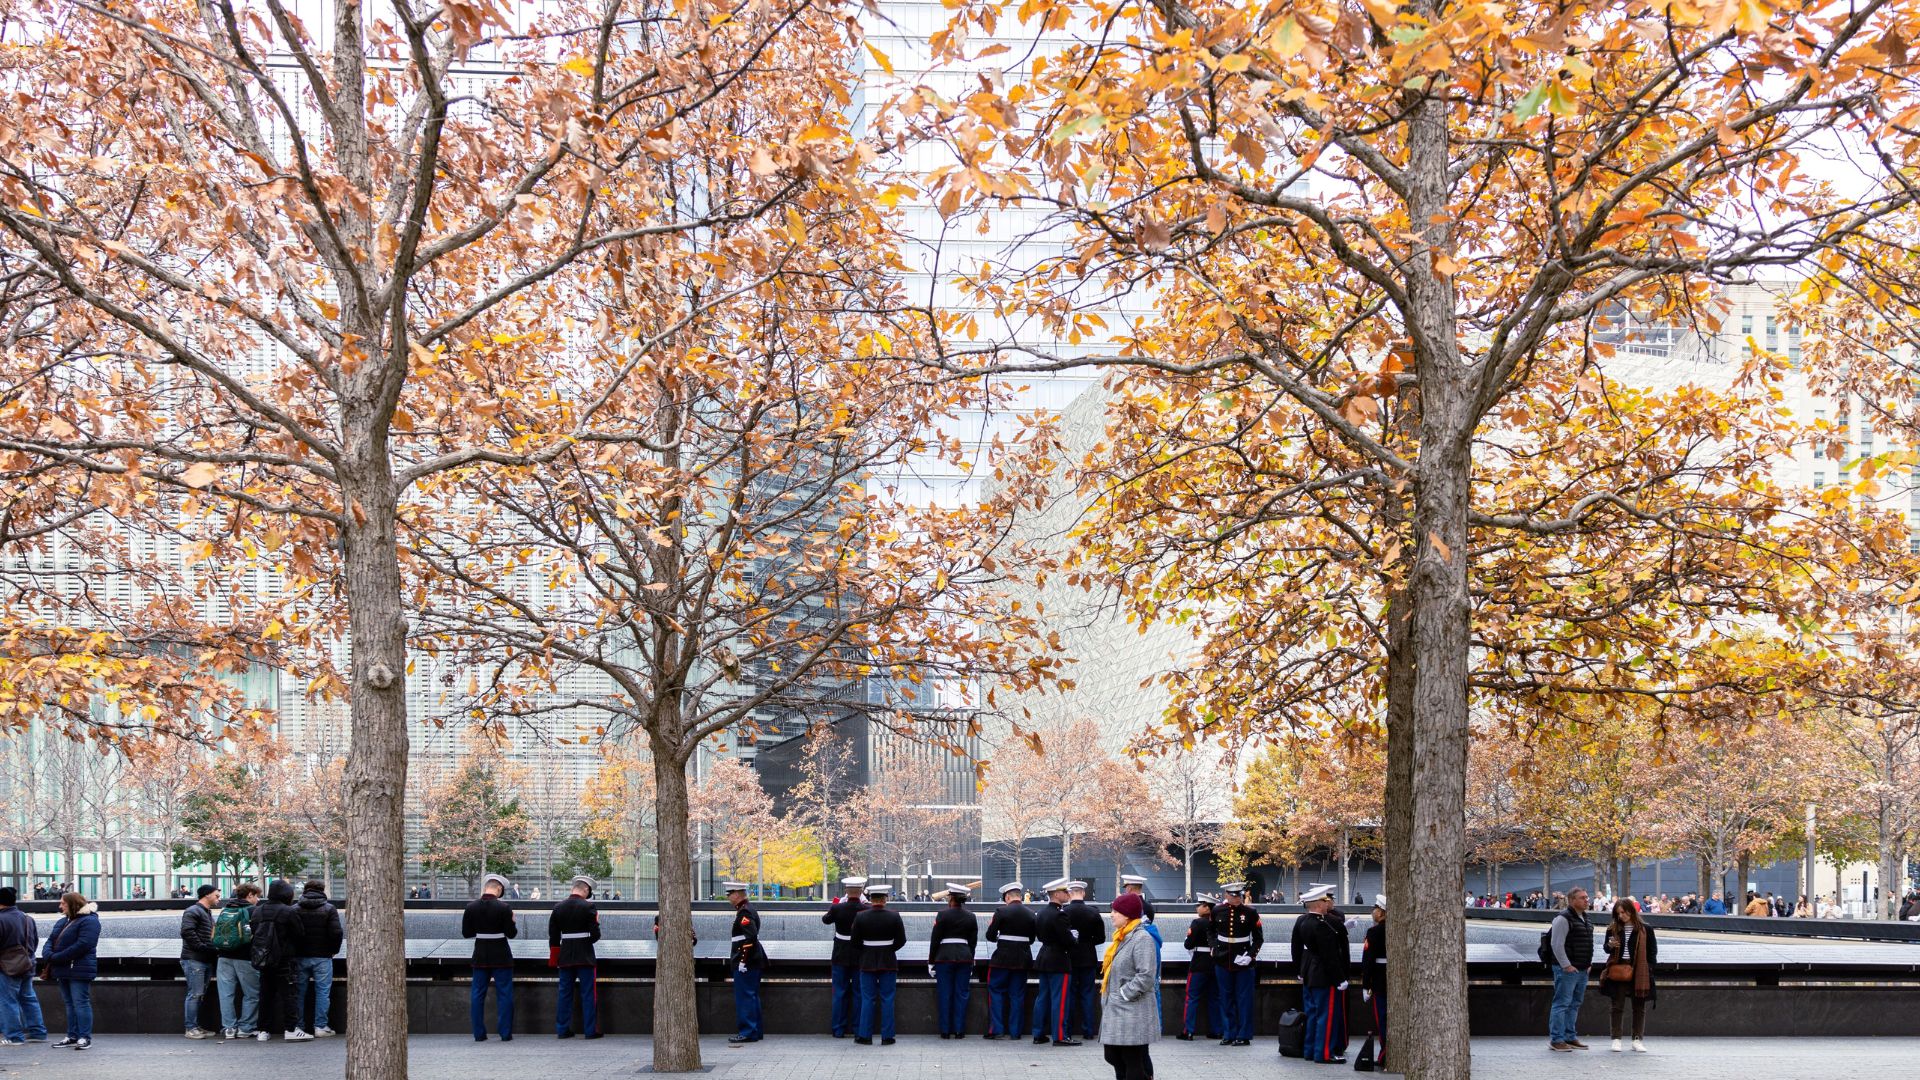 Trees covered in orange and yellow leaves line the Memorial, with U.S. sailors, Marines, and Coast Guard members in dress uniform viewing the pools